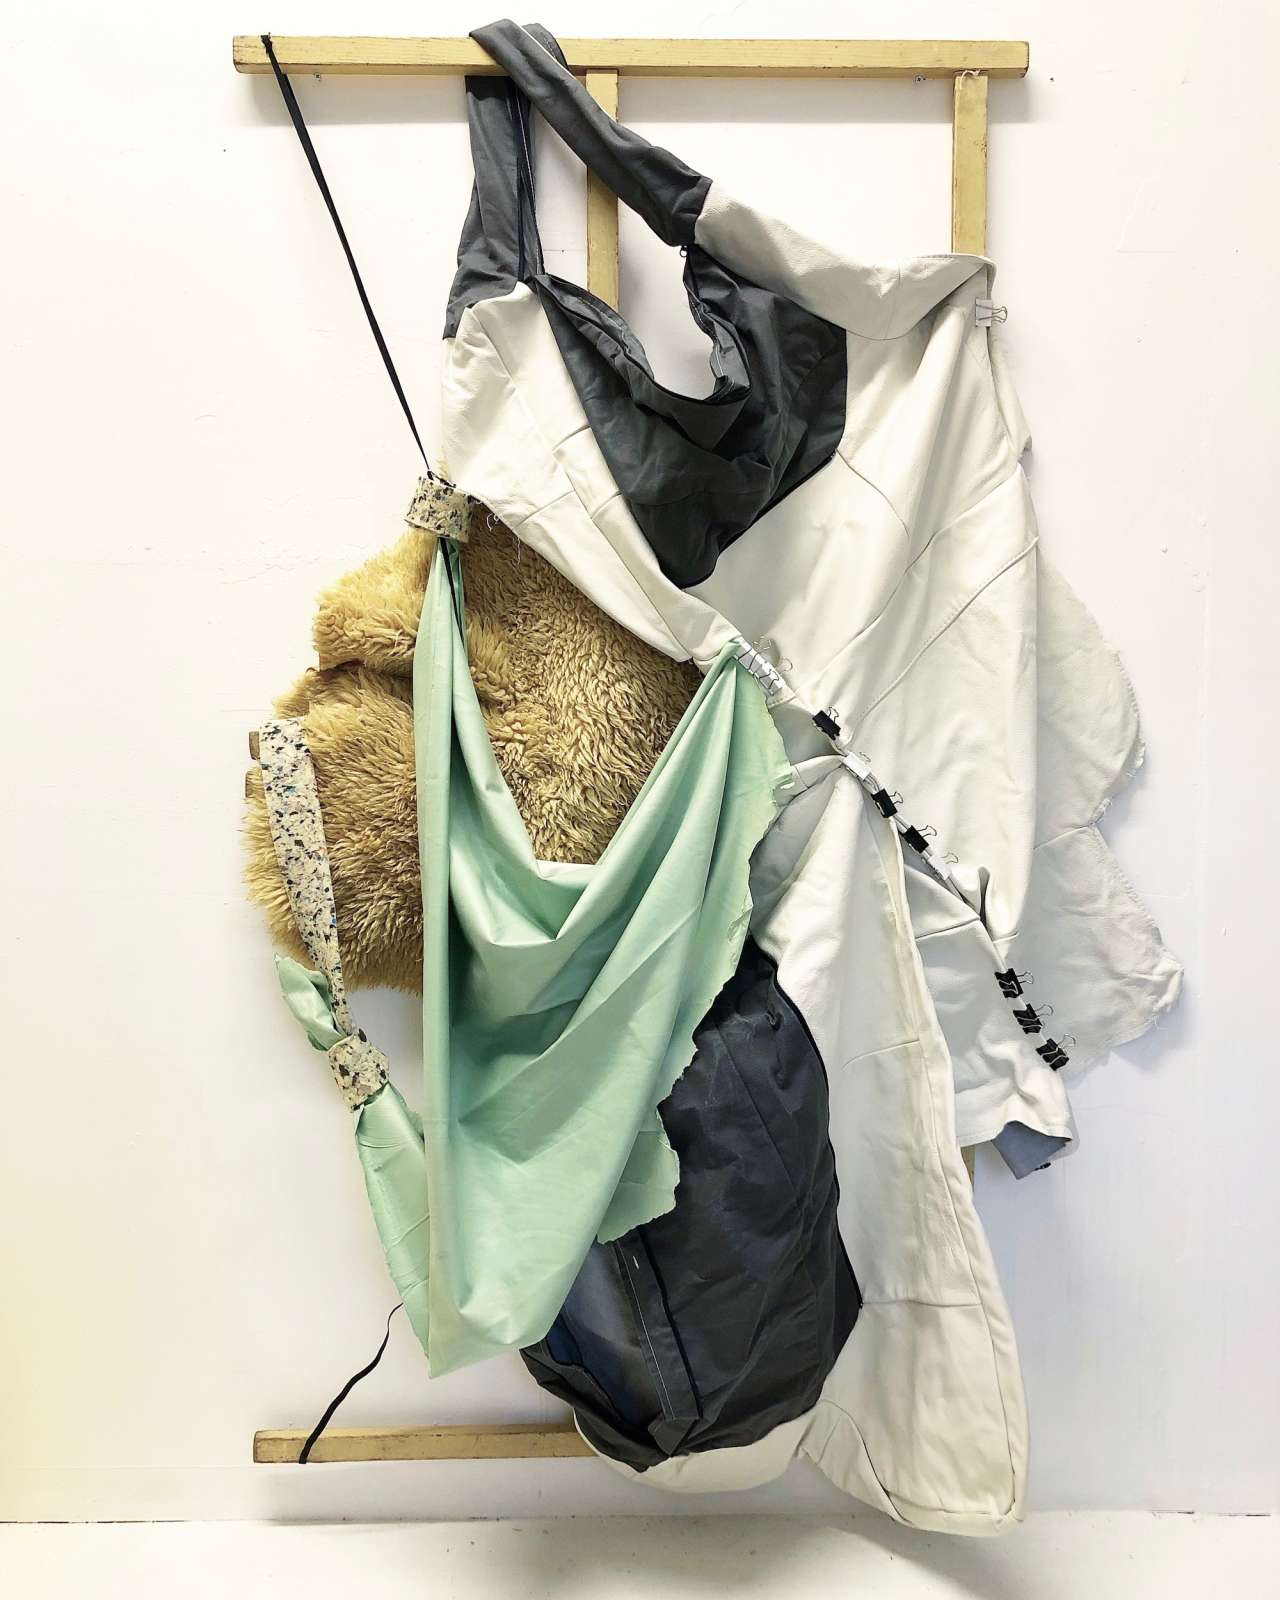 Andrea V Wright, Precarious Conditions of Uncertainty VI, 2021. Vintage Pine Clothes Airer, Shhepskin, Latex, Leather Sofa Covers, Clips, Elastic, Carpet Foam